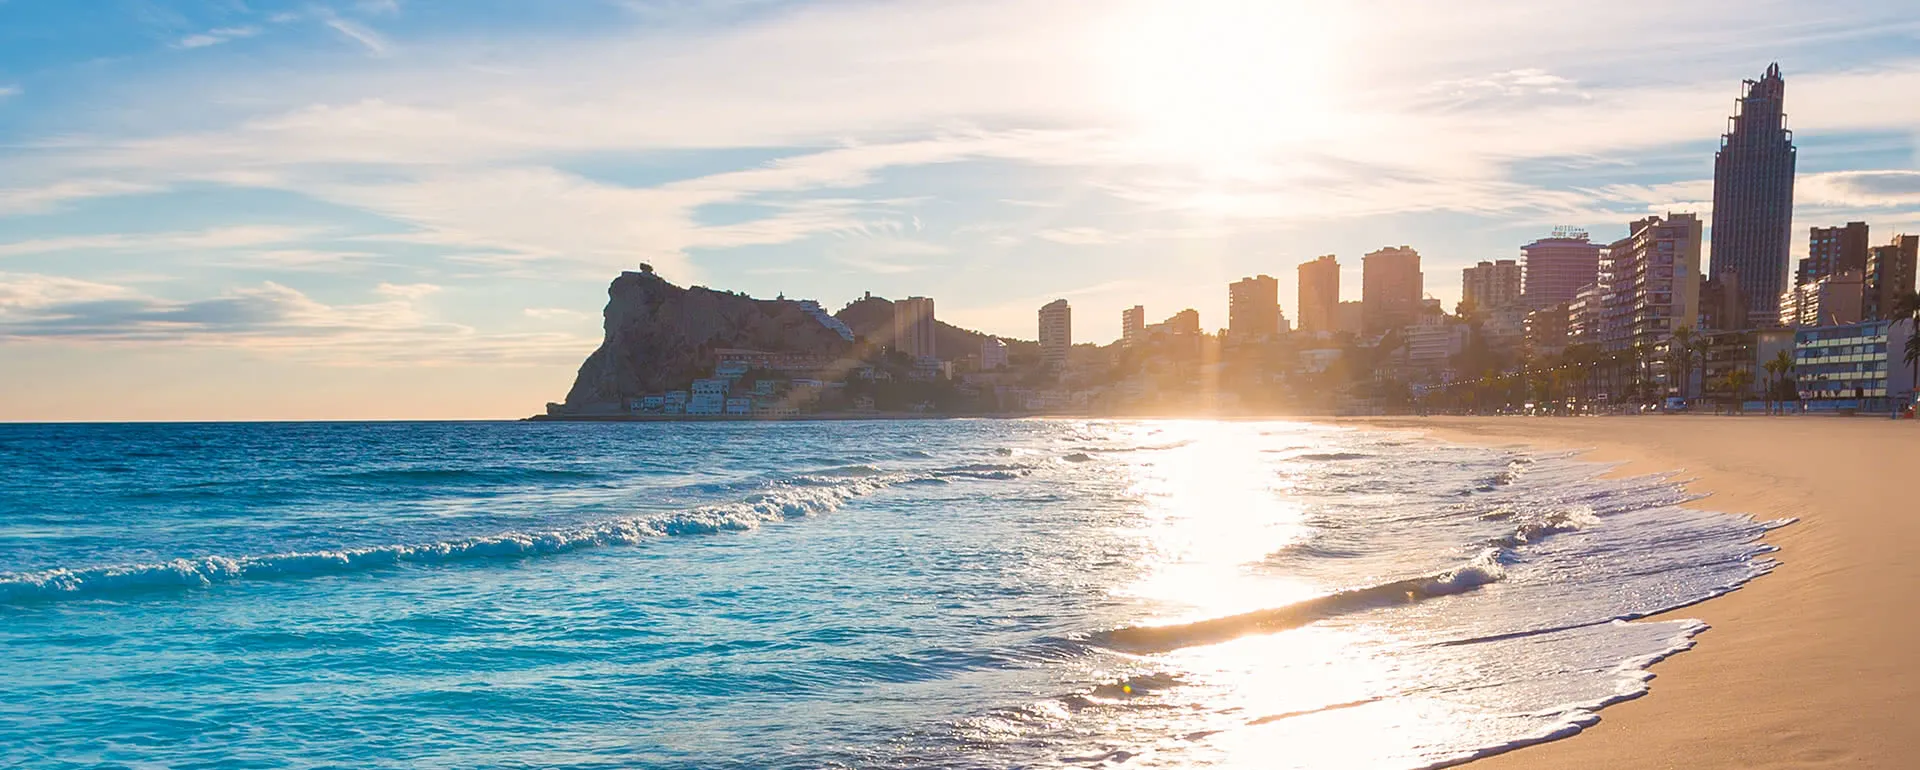 Benidorm - the destination with youth hostels